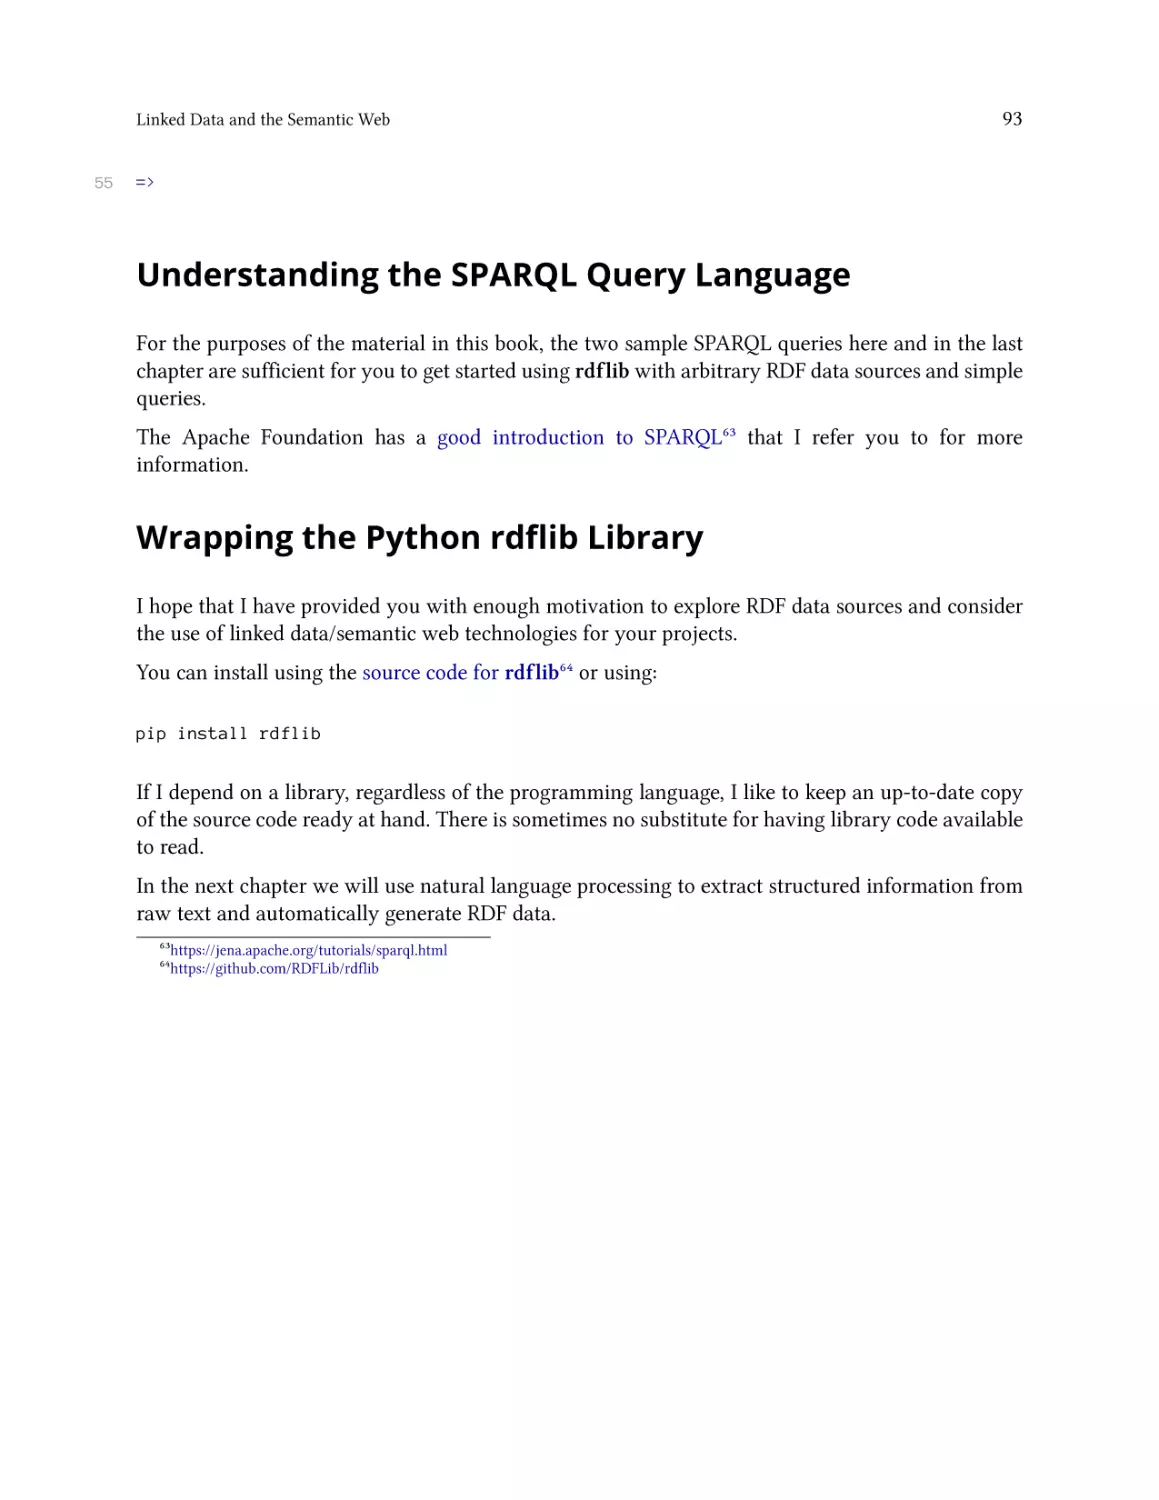 Understanding the SPARQL Query Language
Wrapping the Python rdflib Library